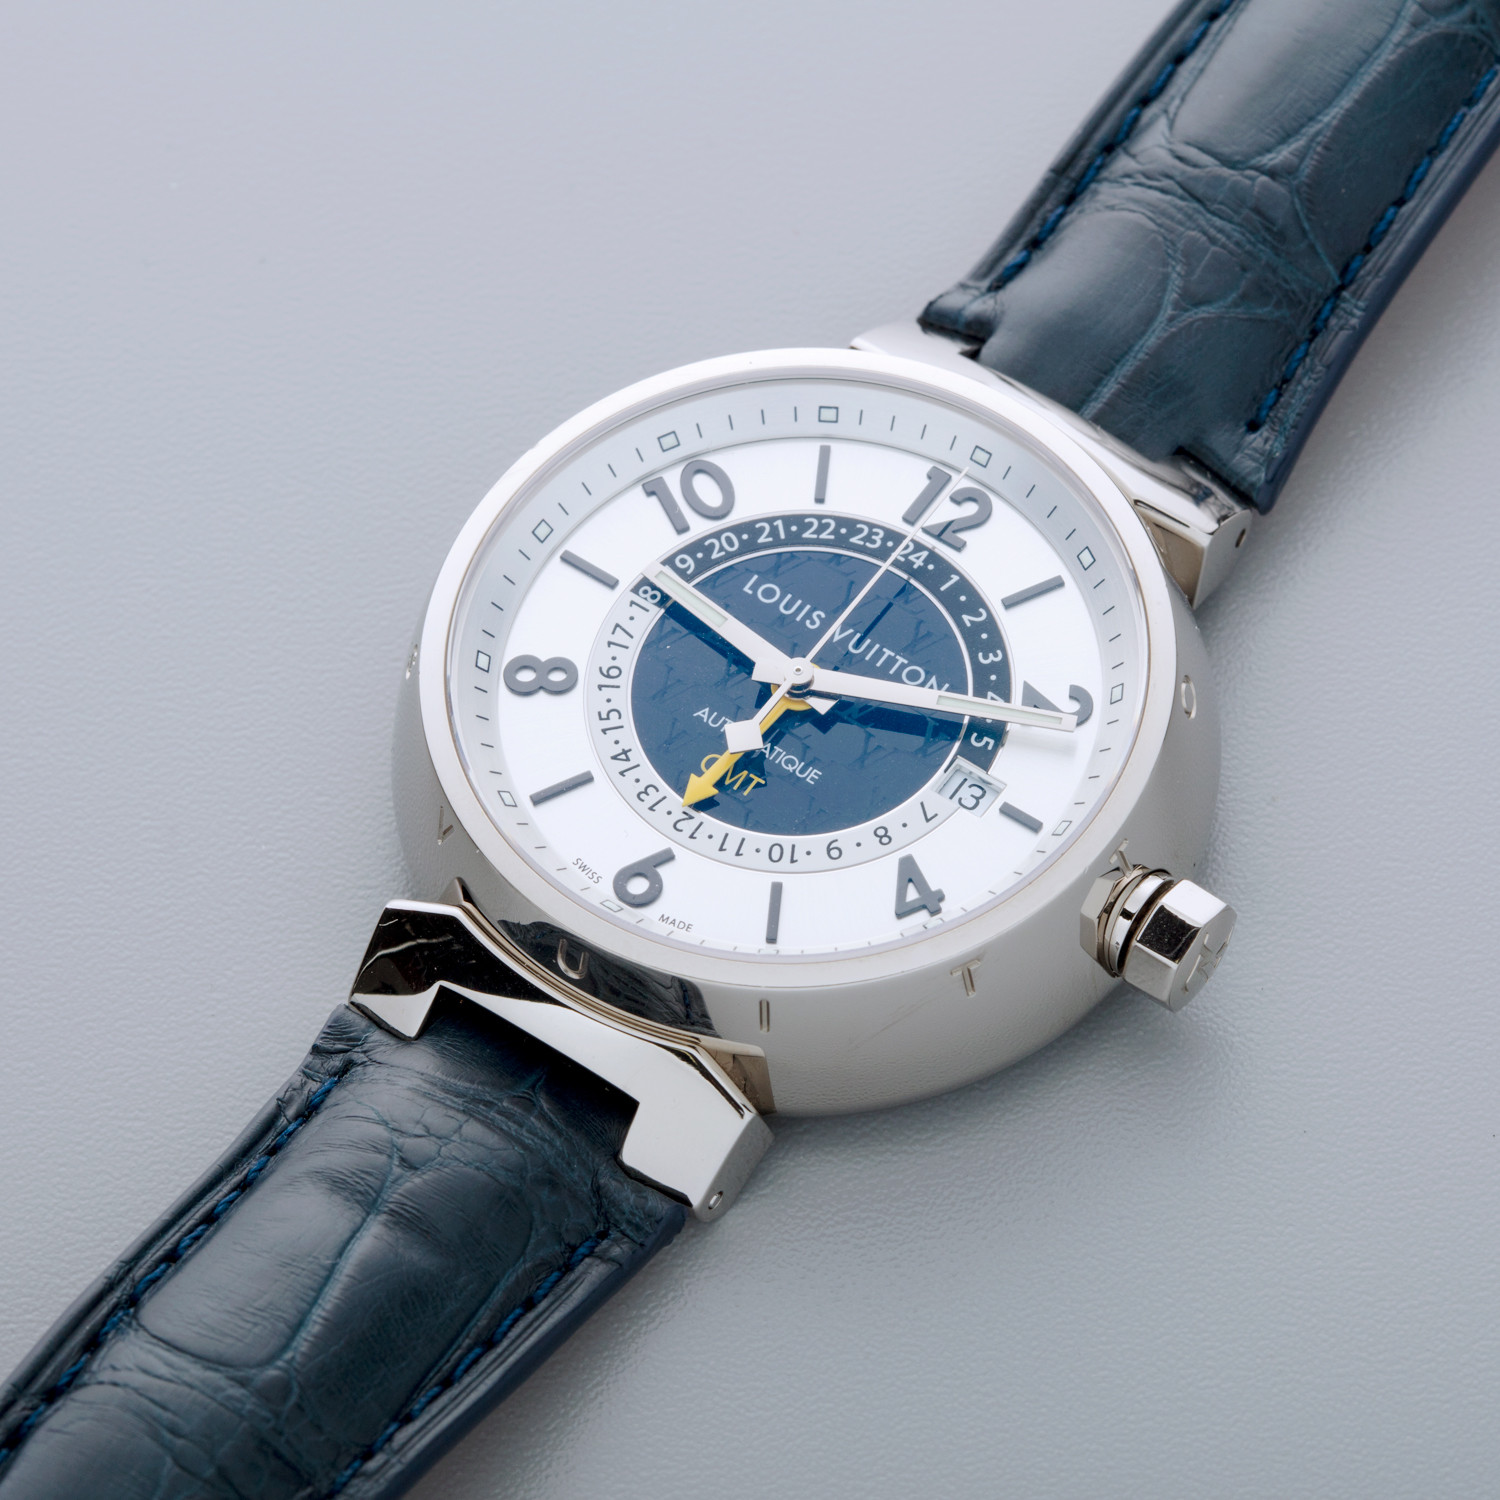 Louis Vuitton Tambour; Highlights Of An Imposing History